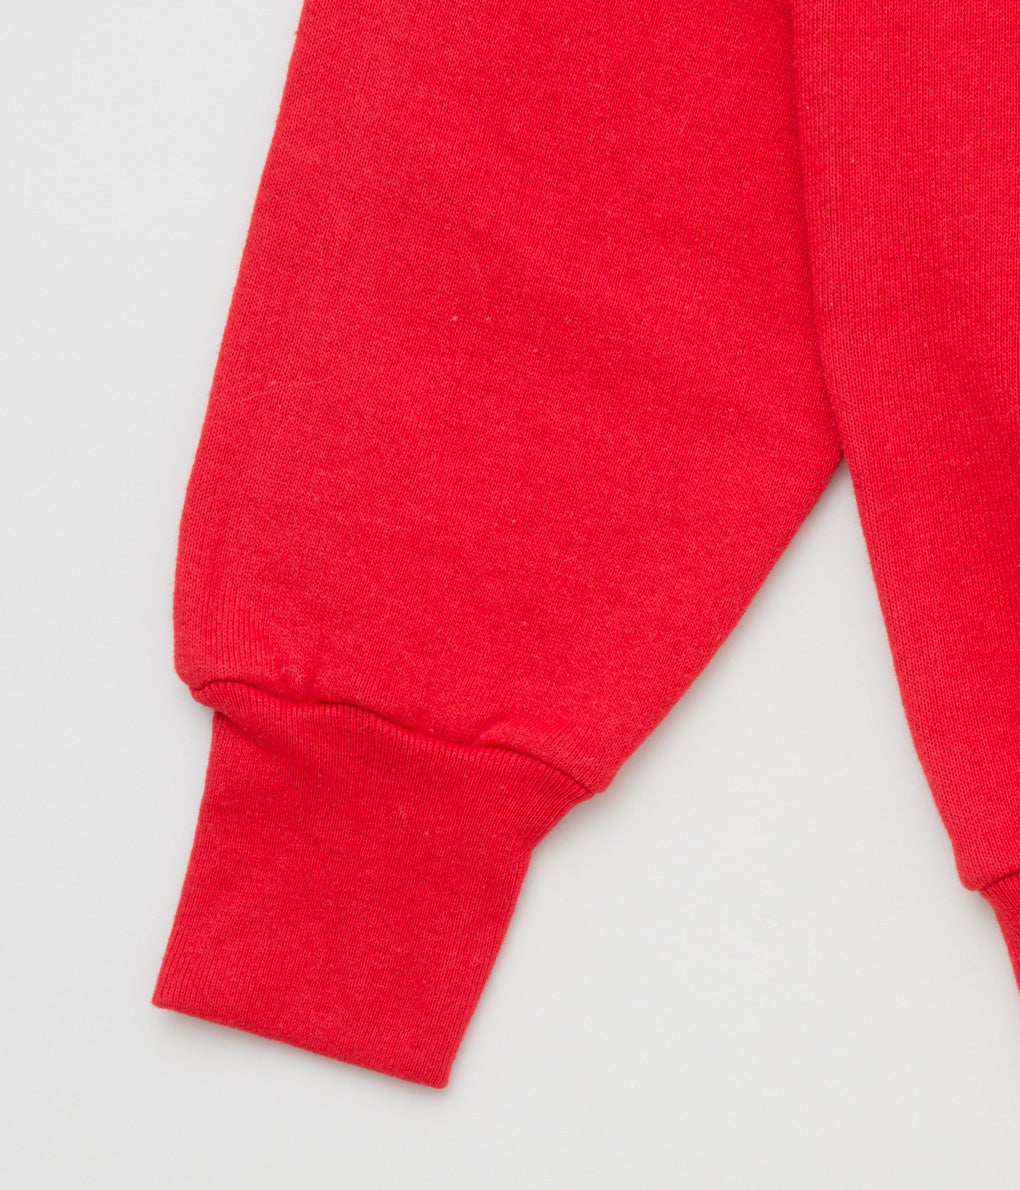 VINTAGE "CHATHAM CAPE CPD SWEAT" (RED)